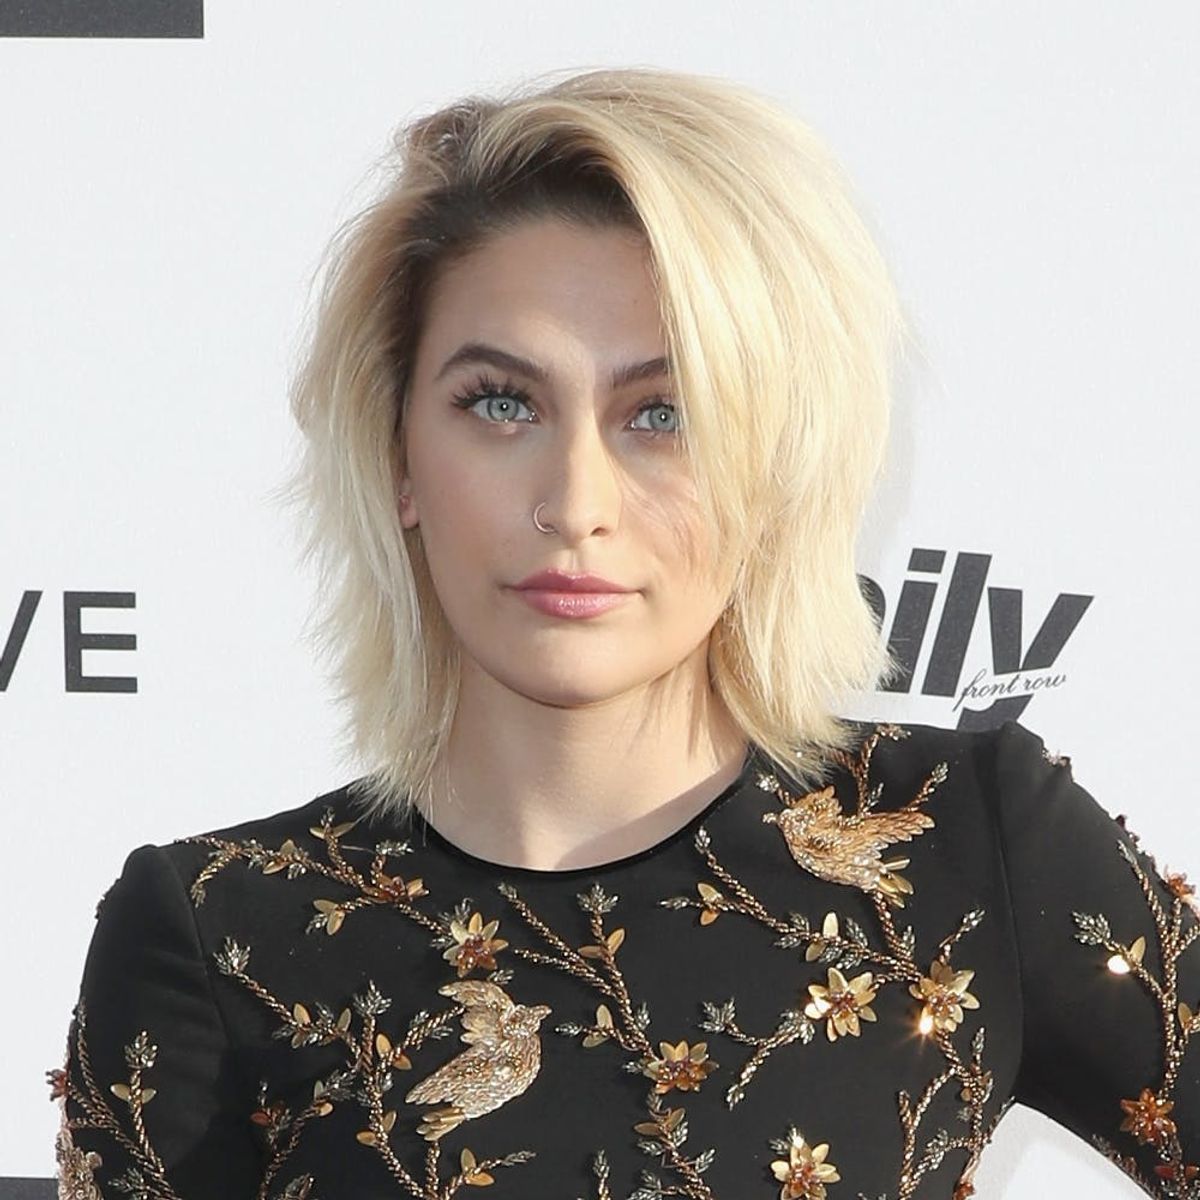 Paris Jackson Wants Us to Know That’s She’s NOT Dating Zac Efron